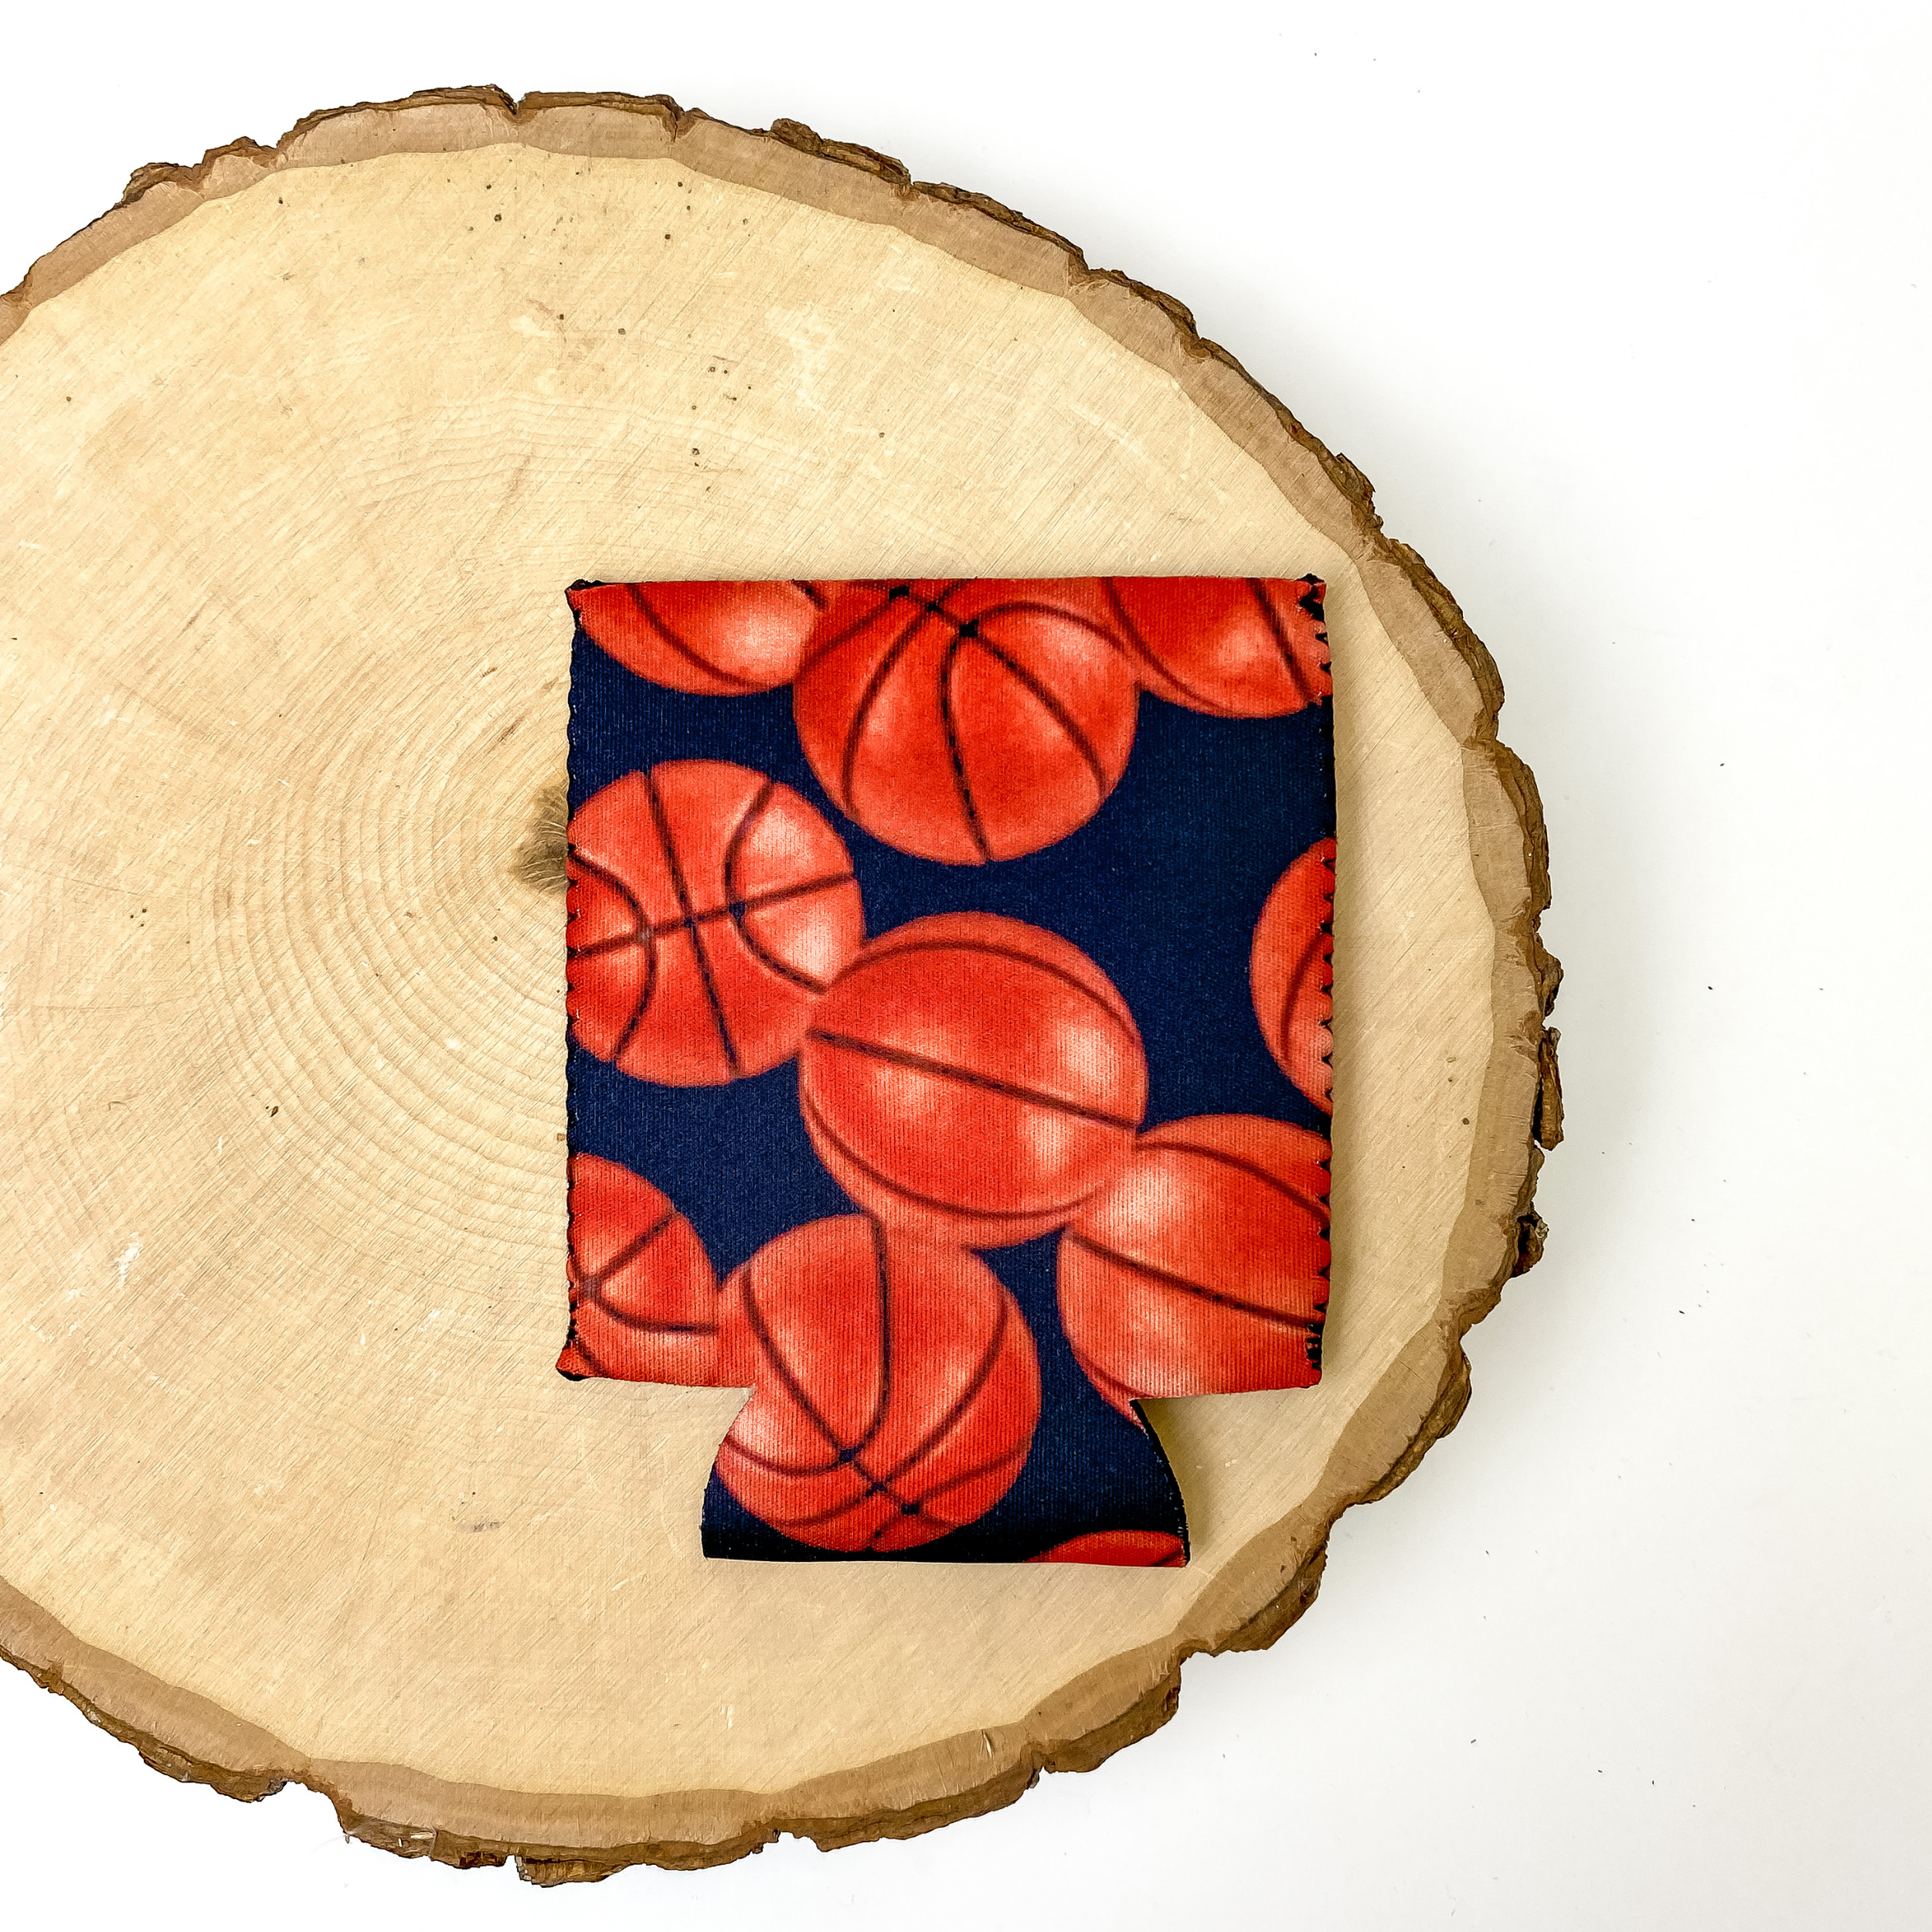 Basketball print koozie with black background. This koozie is pictured on a piece of wood on a white background.